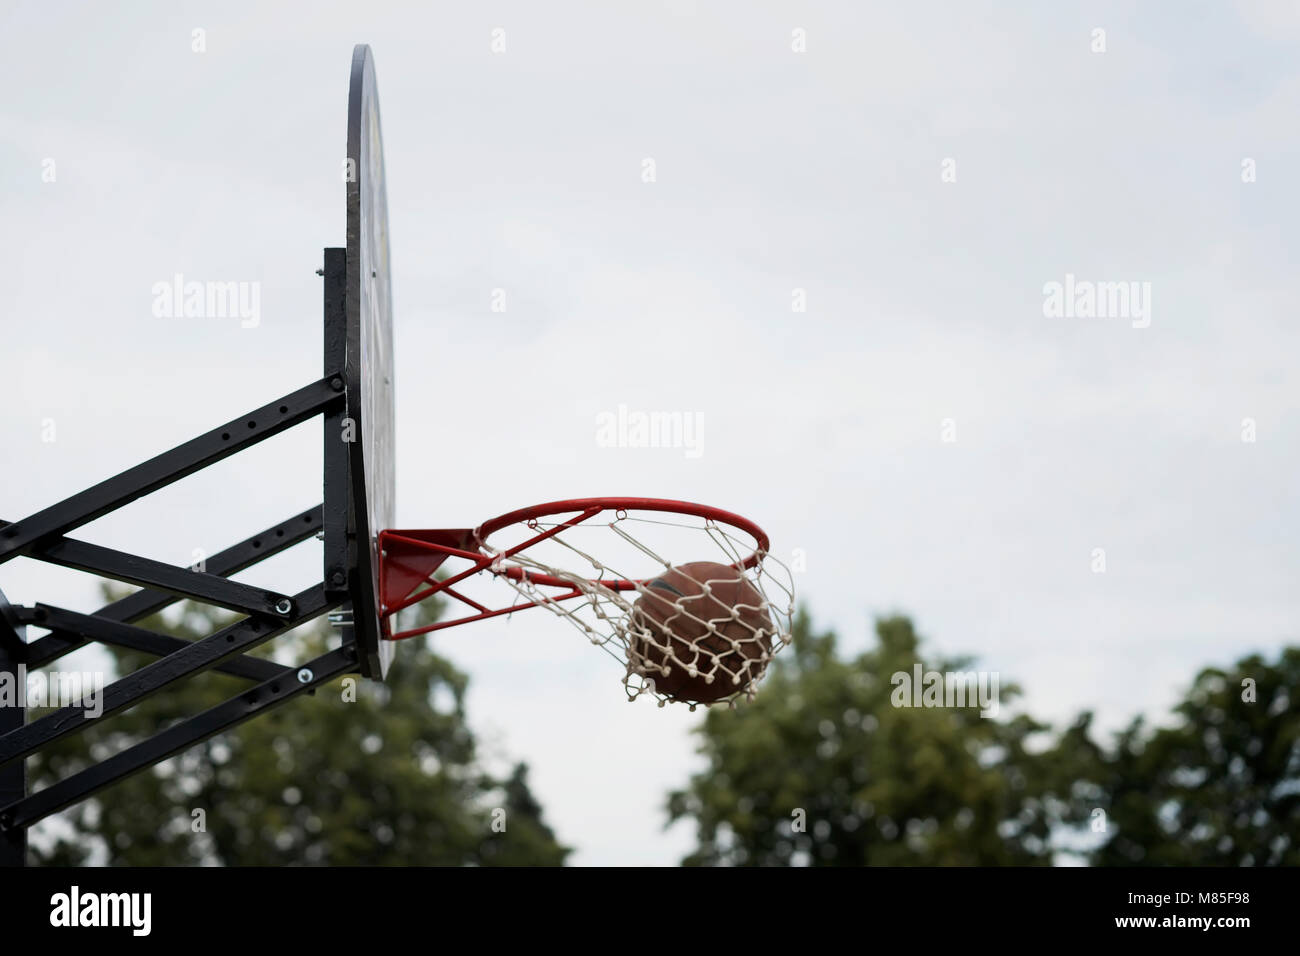 Street basketball game. Basketball shield, ball going through basket on  background of sky, trees. Concept of sport, hit accuracy, active lifestyle  Stock Photo - Alamy